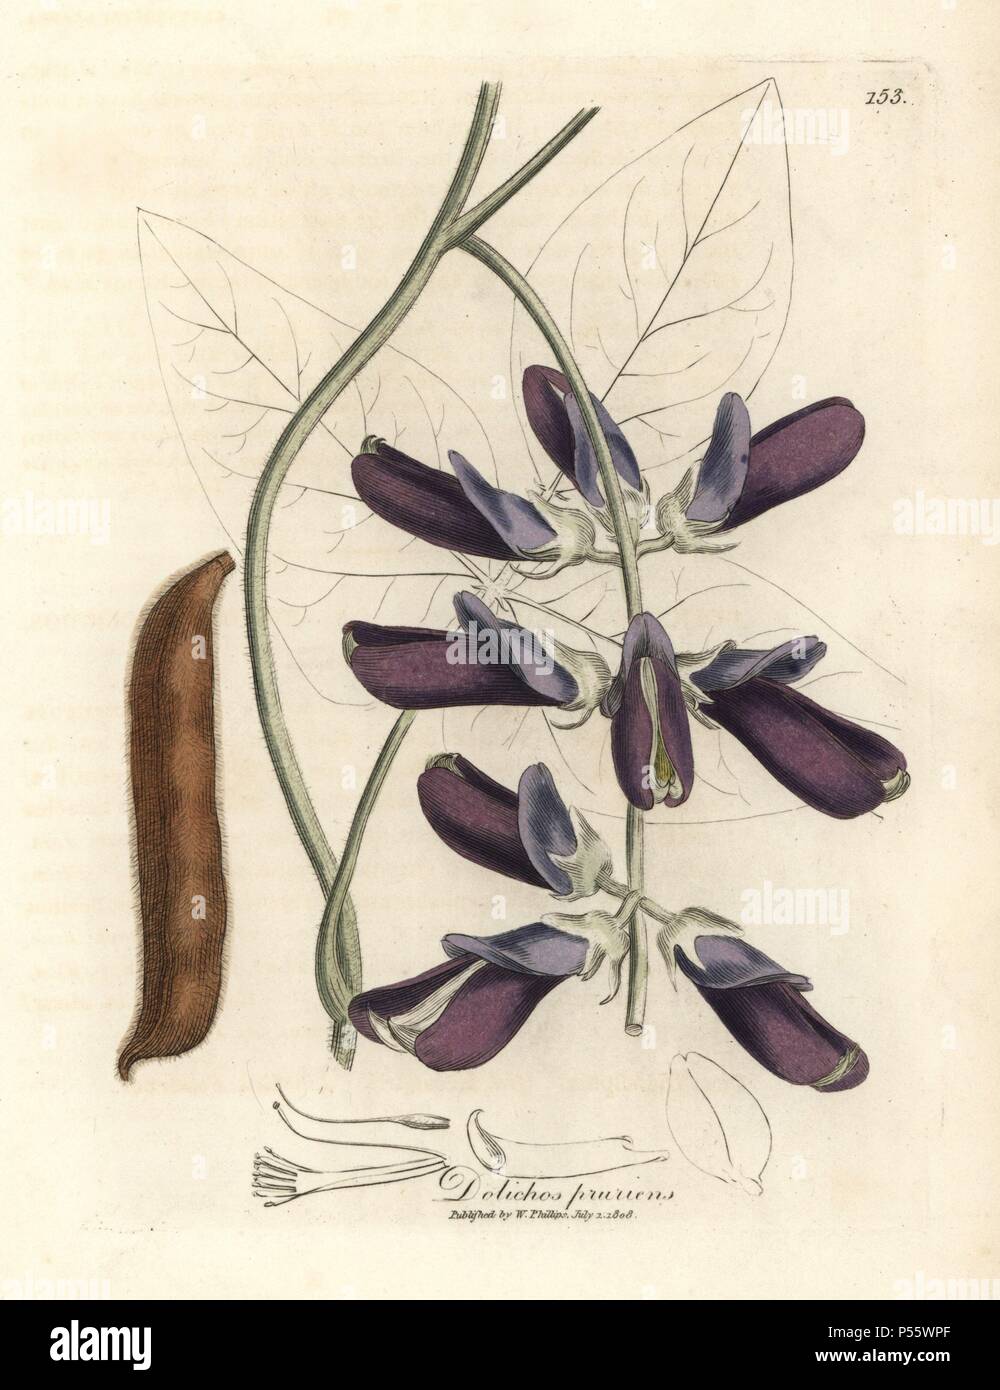 Purple flowered cowhage dolichos with hairy seedpod, Dolichos pruriens. Anthelmintic remedy. Handcolored copperplate engraving from a botanical illustration by James Sowerby from William Woodville and Sir William Jackson Hooker's 'Medical Botany' 1832. The tireless Sowerby (1757-1822) drew over 2,500 plants for Smith's mammoth 'English Botany' (1790-1814) and 440 mushrooms for 'Coloured Figures of English Fungi ' (1797) among many other works. Stock Photo